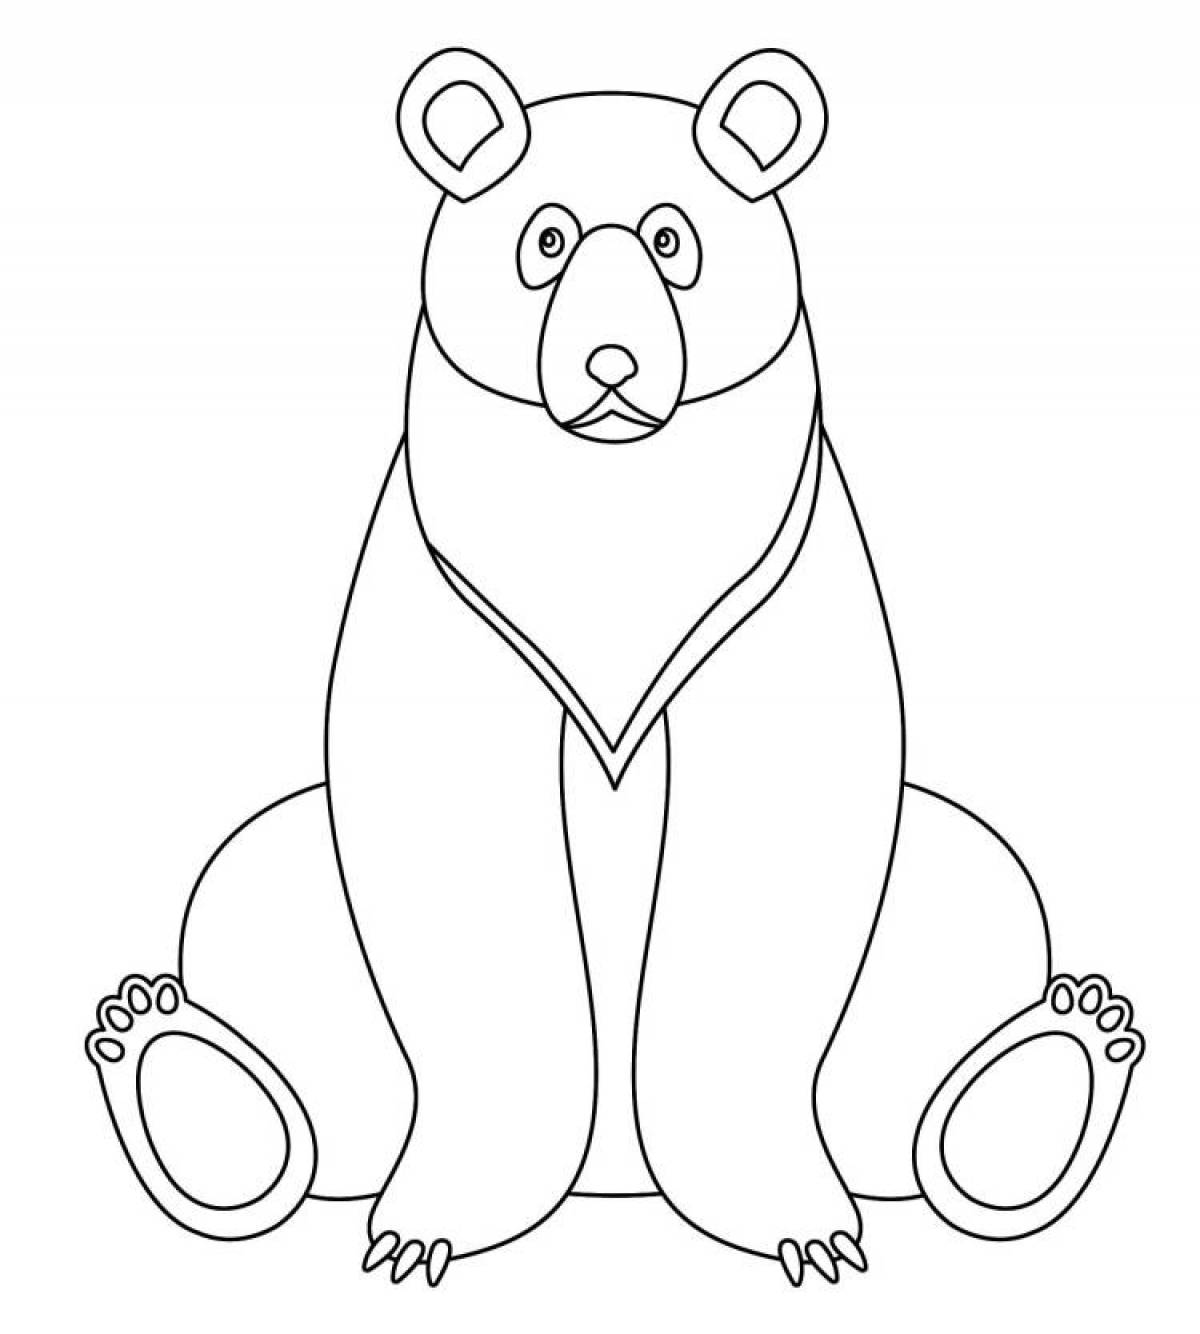 Crazy bear coloring book for kids 3-4 years old